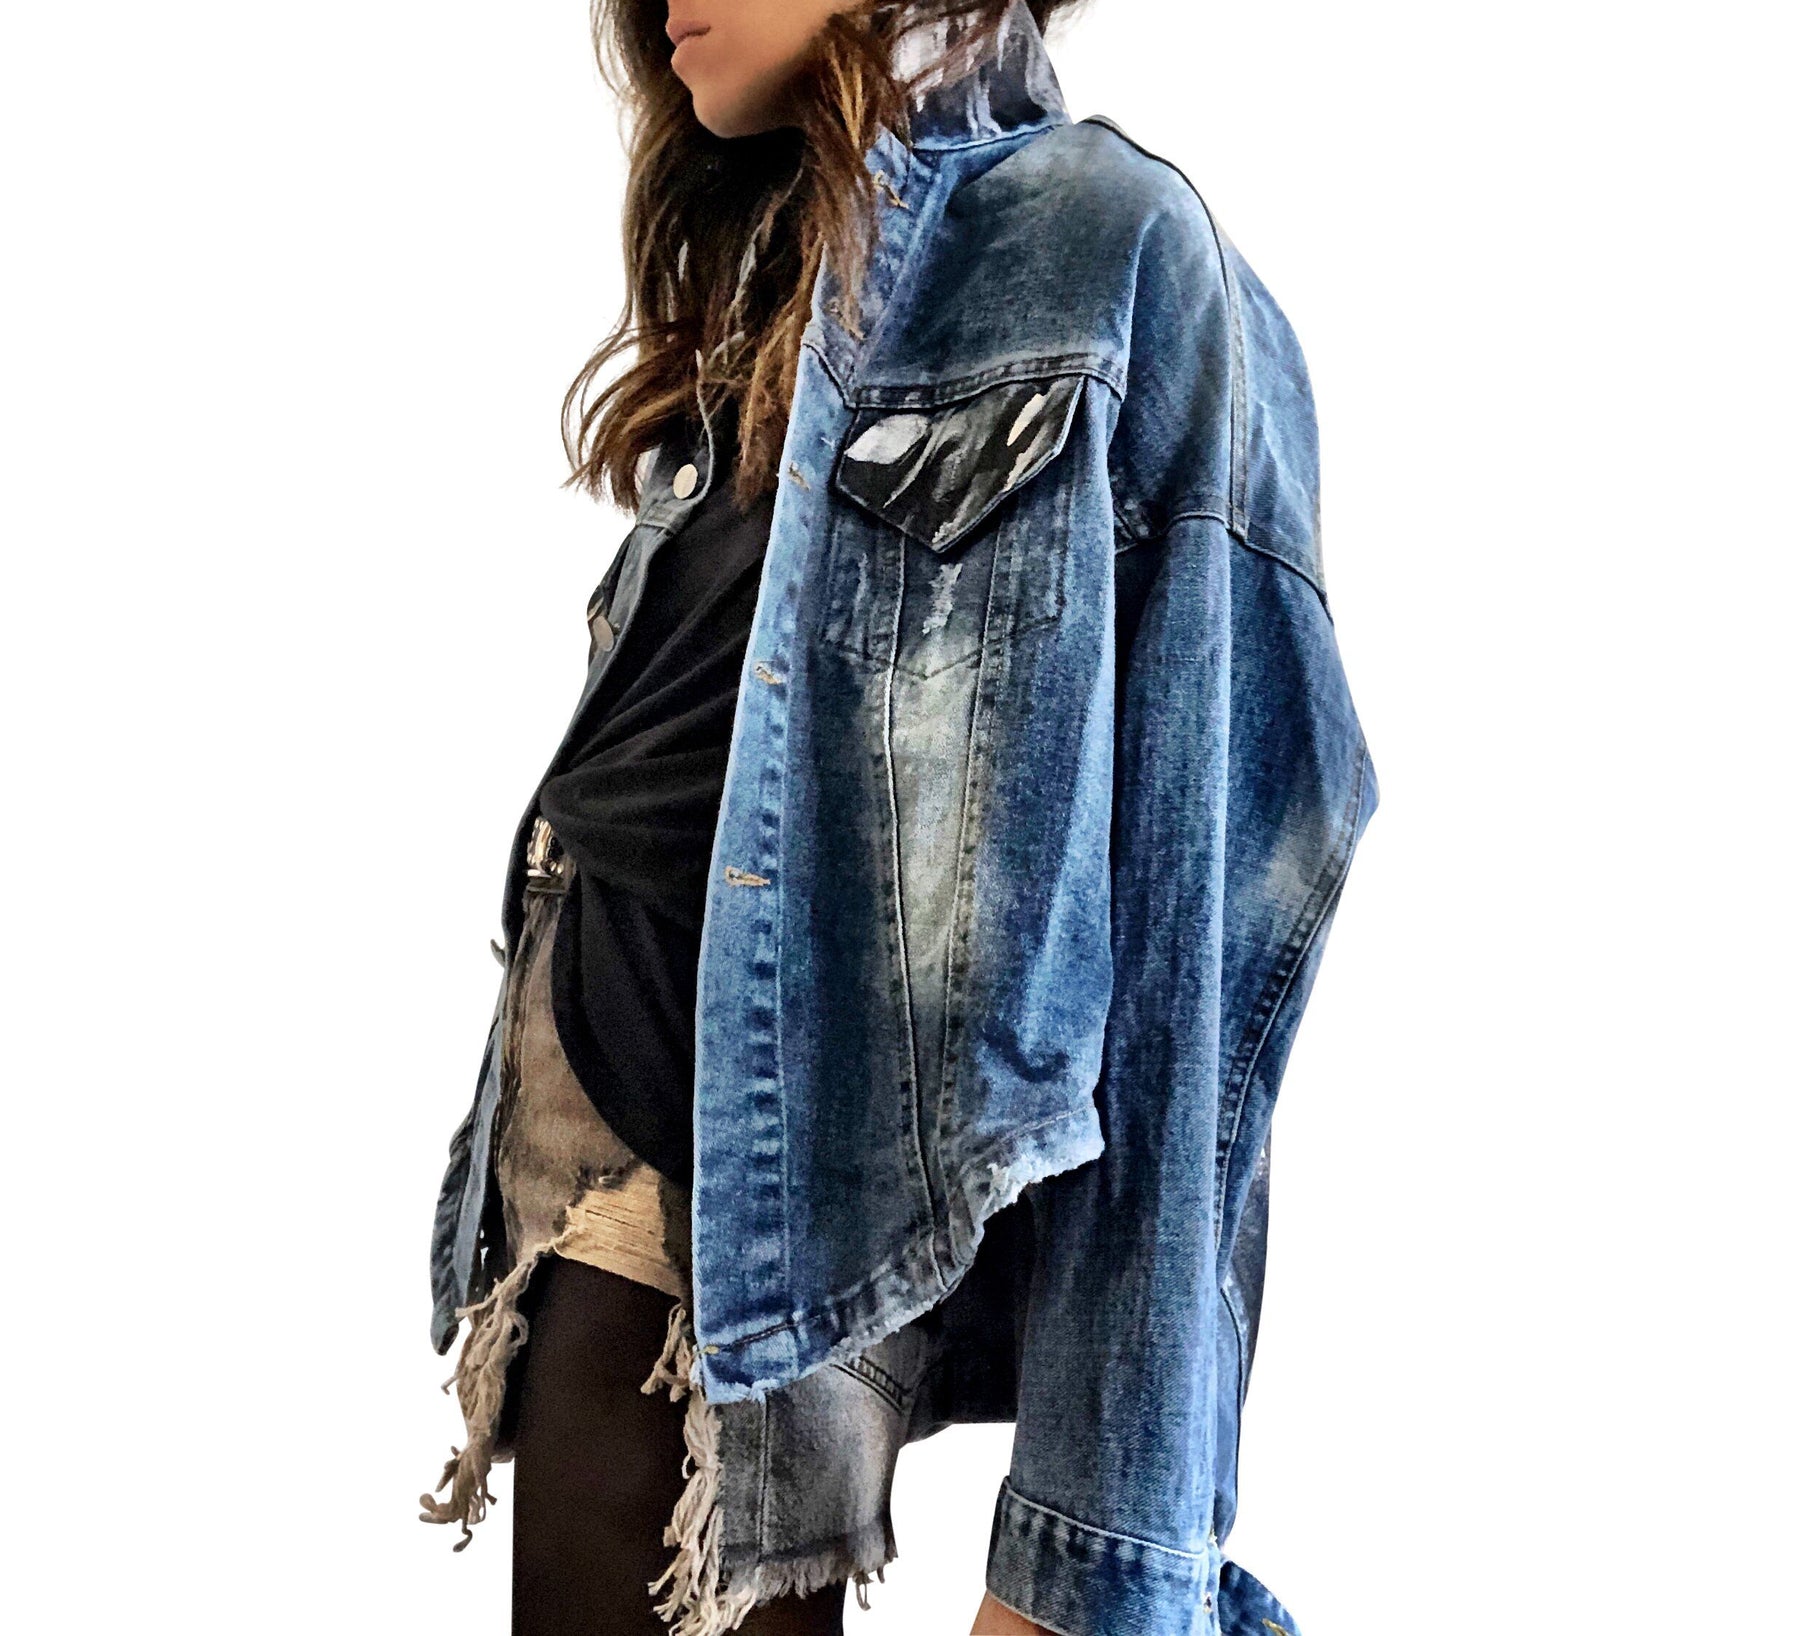 FBYDLL Women Ripped Denim Jacket - Knotted Back Autumn Casual Loose Jean  Coat, Long Exaggerated Trucker Long Sleeve Cowboy Top, With Pockets Button  Up For Ladies Girls Xs - L,Blue,Xs : Amazon.co.uk: